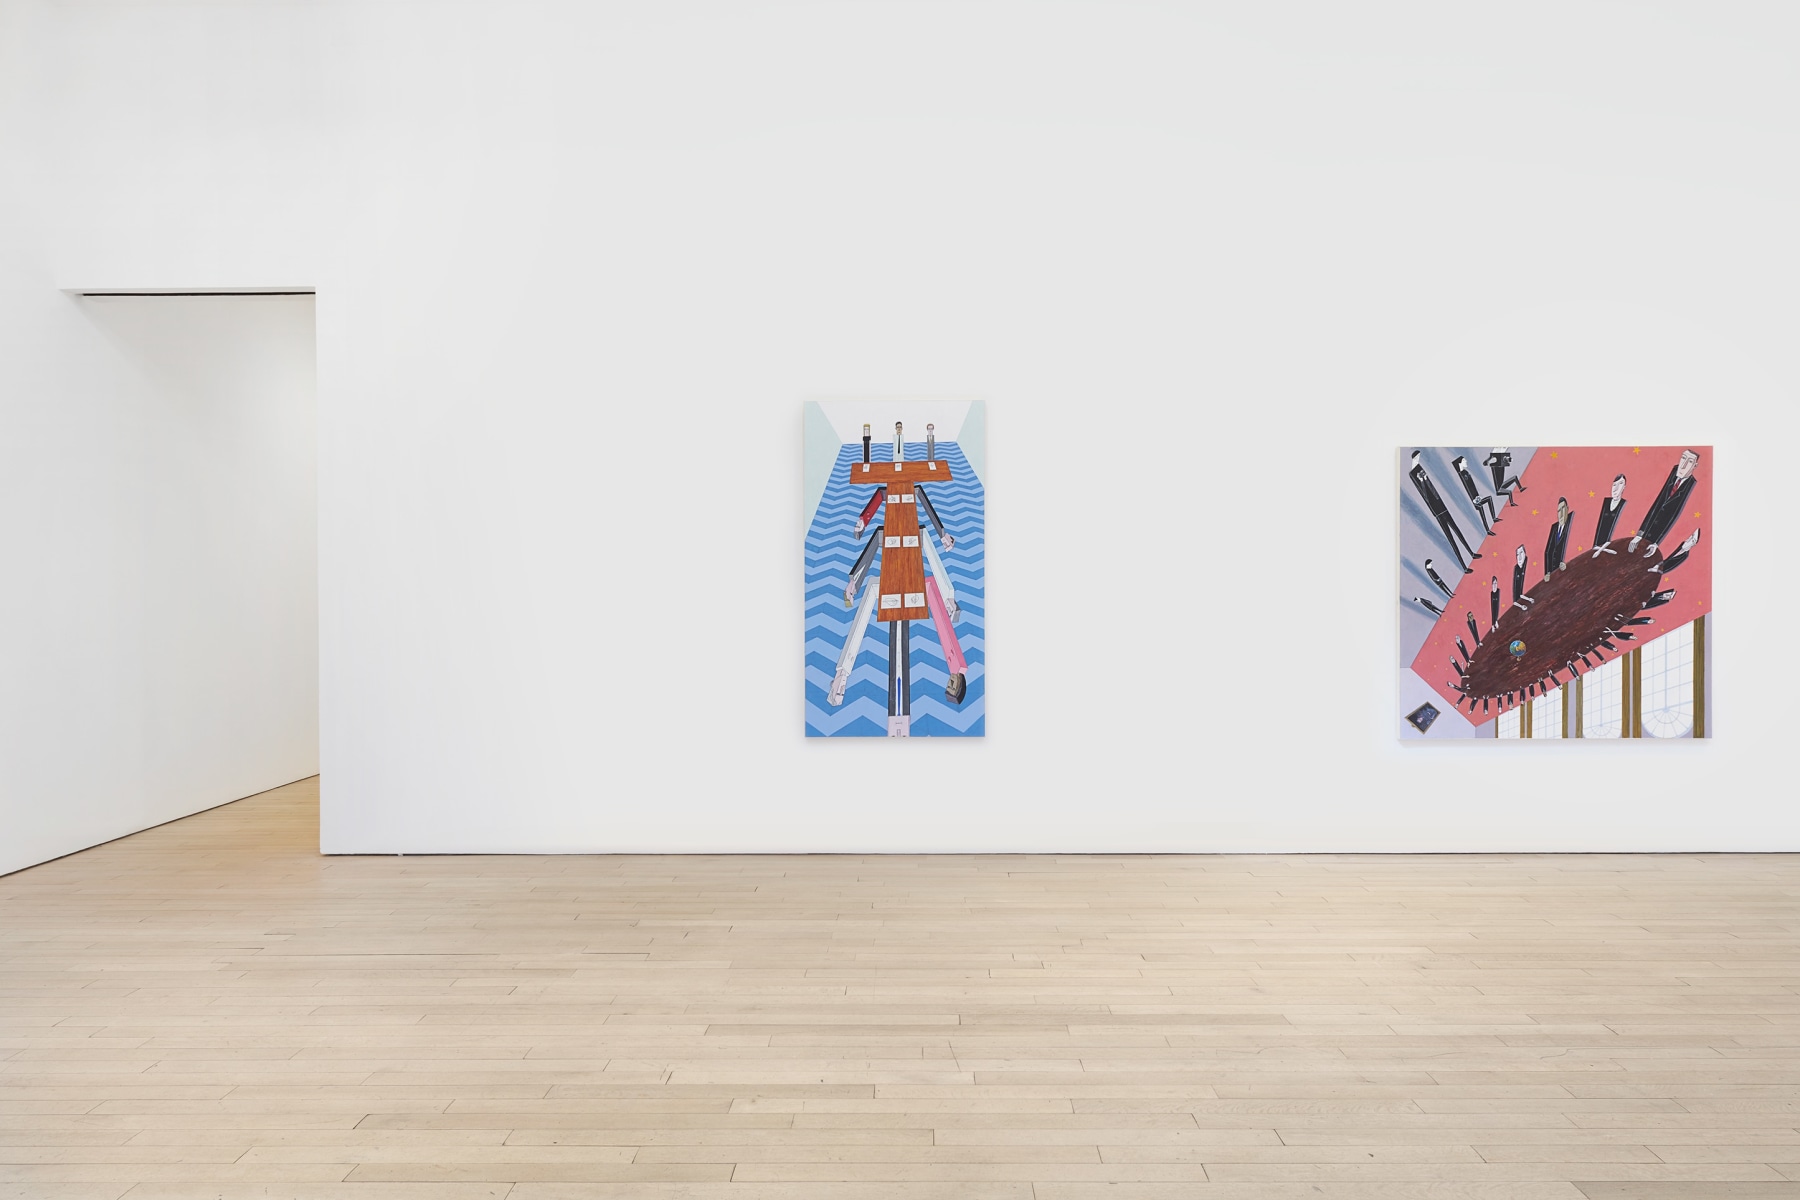 Installation view of two artworks